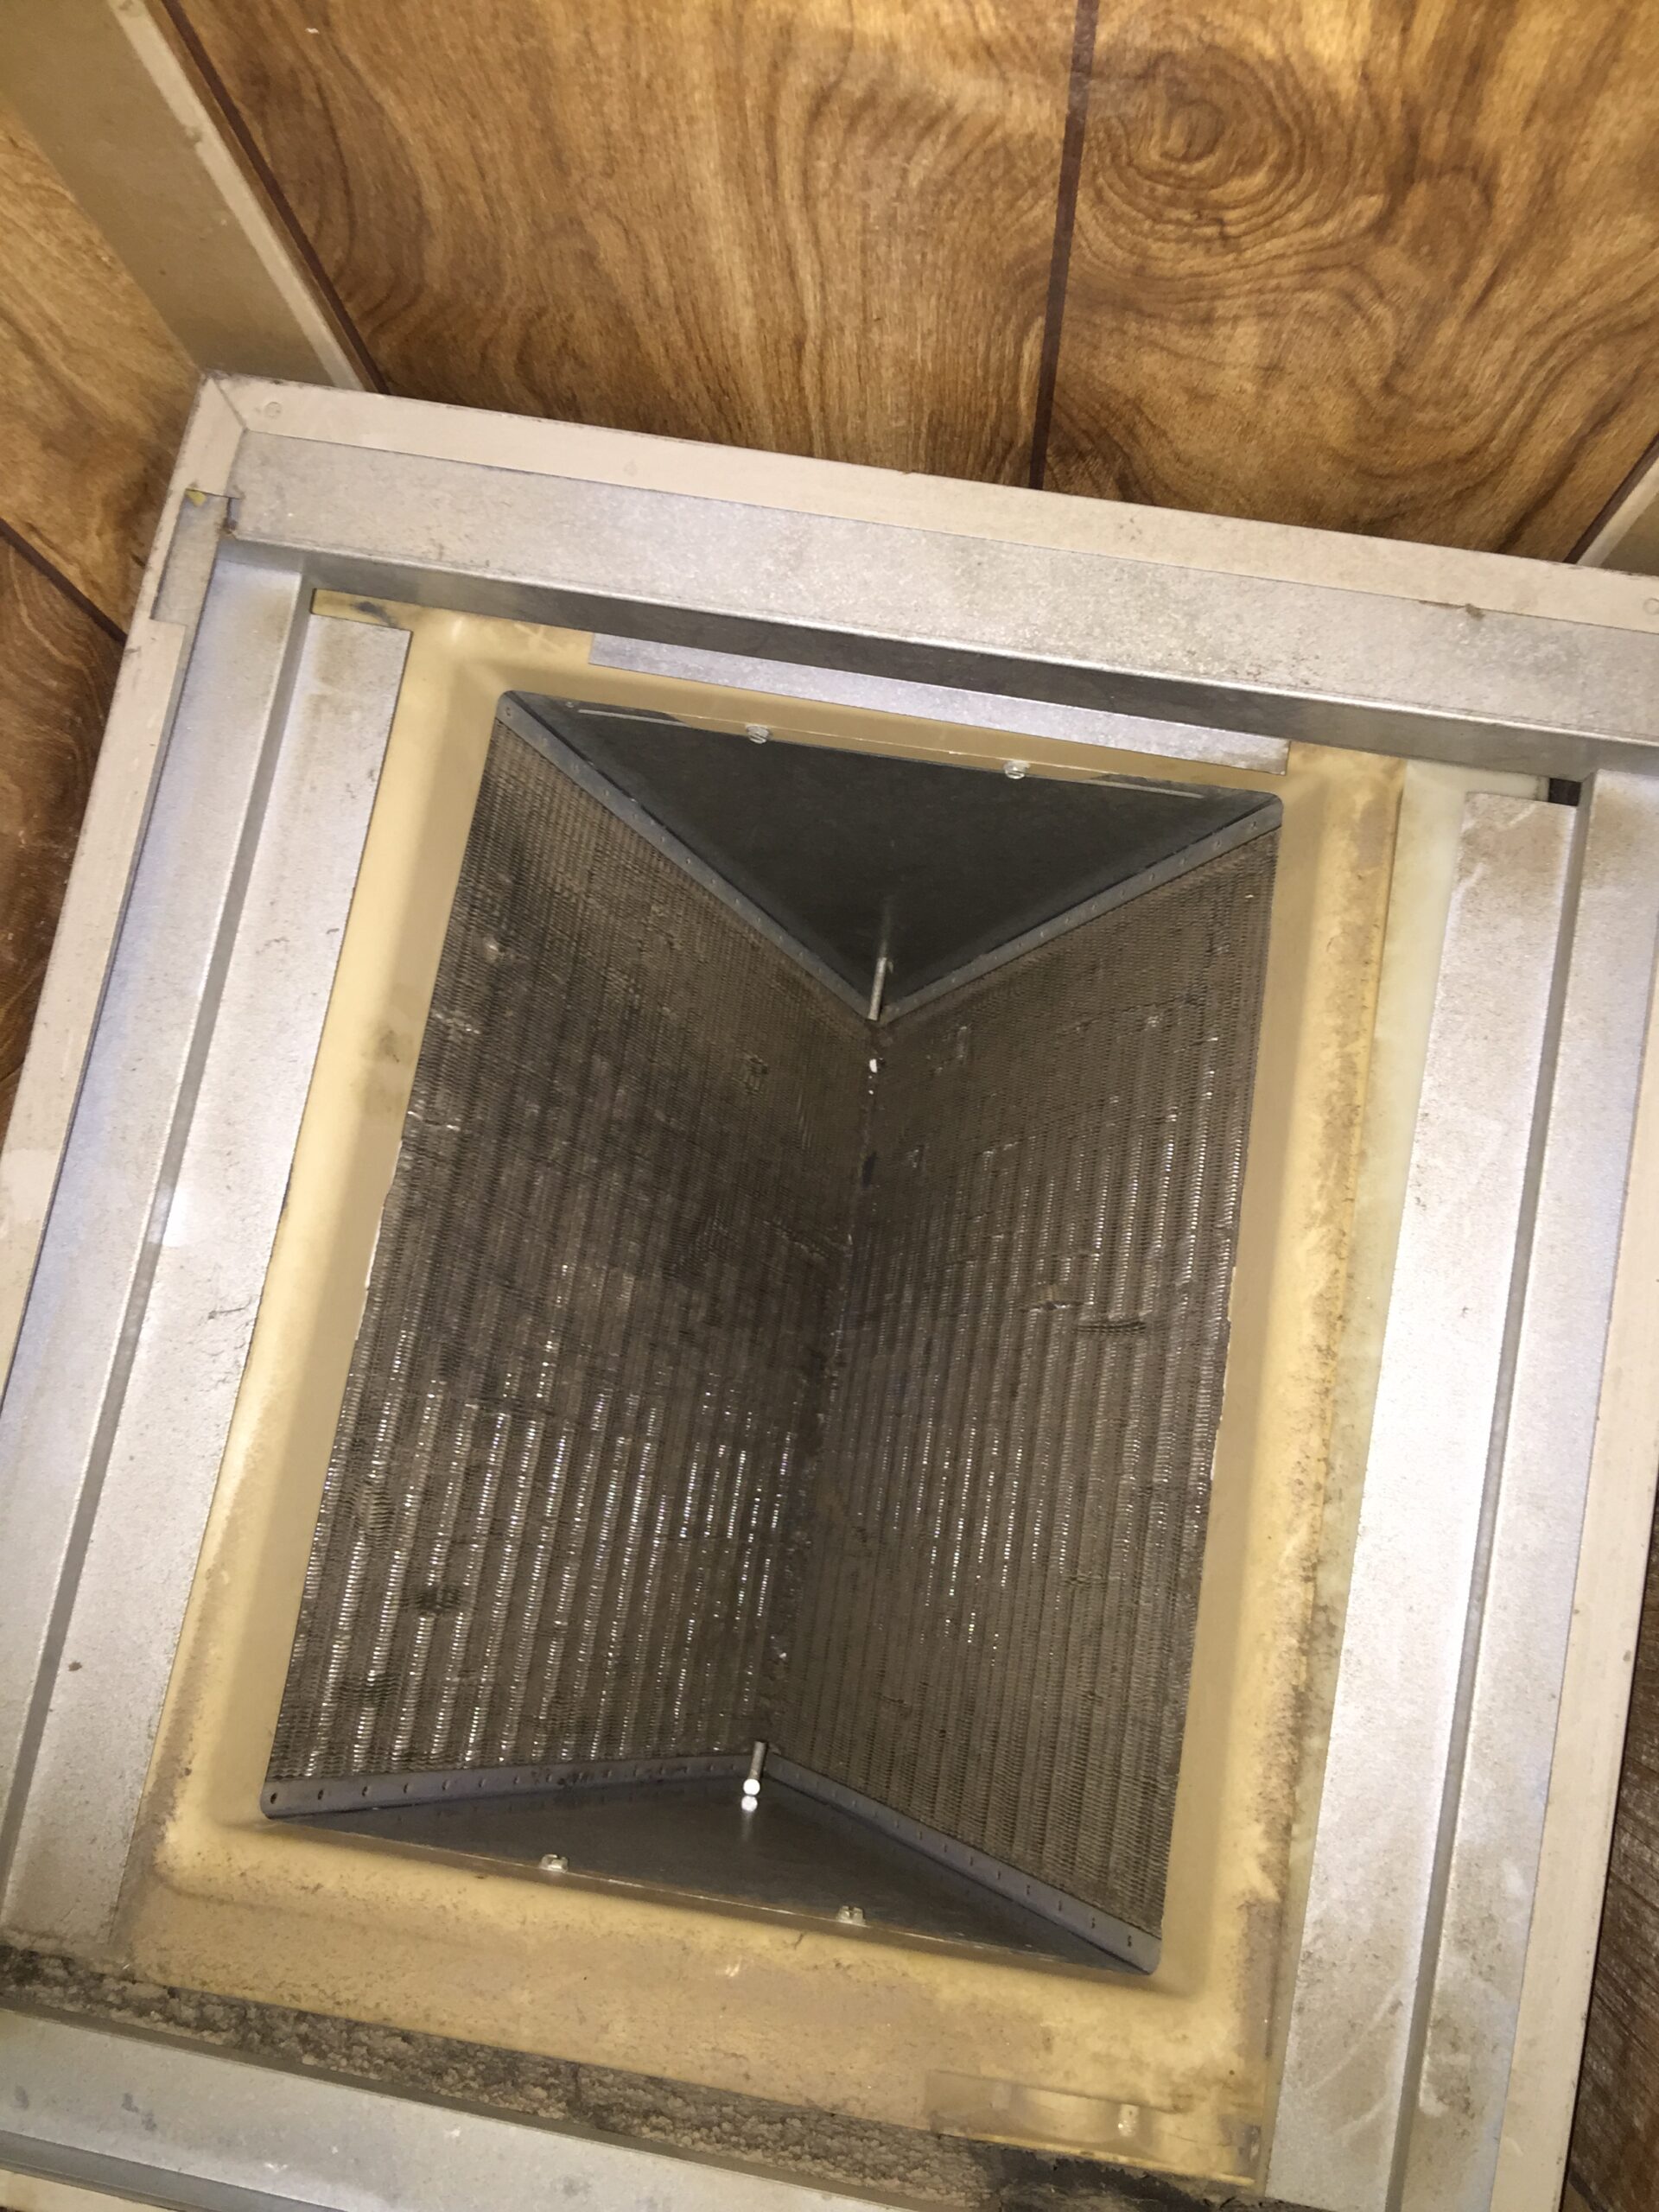 A/C evap coils after they have been cleaned by A-1 Duct Cleaning & Chimney Sweep in Orange County, CA